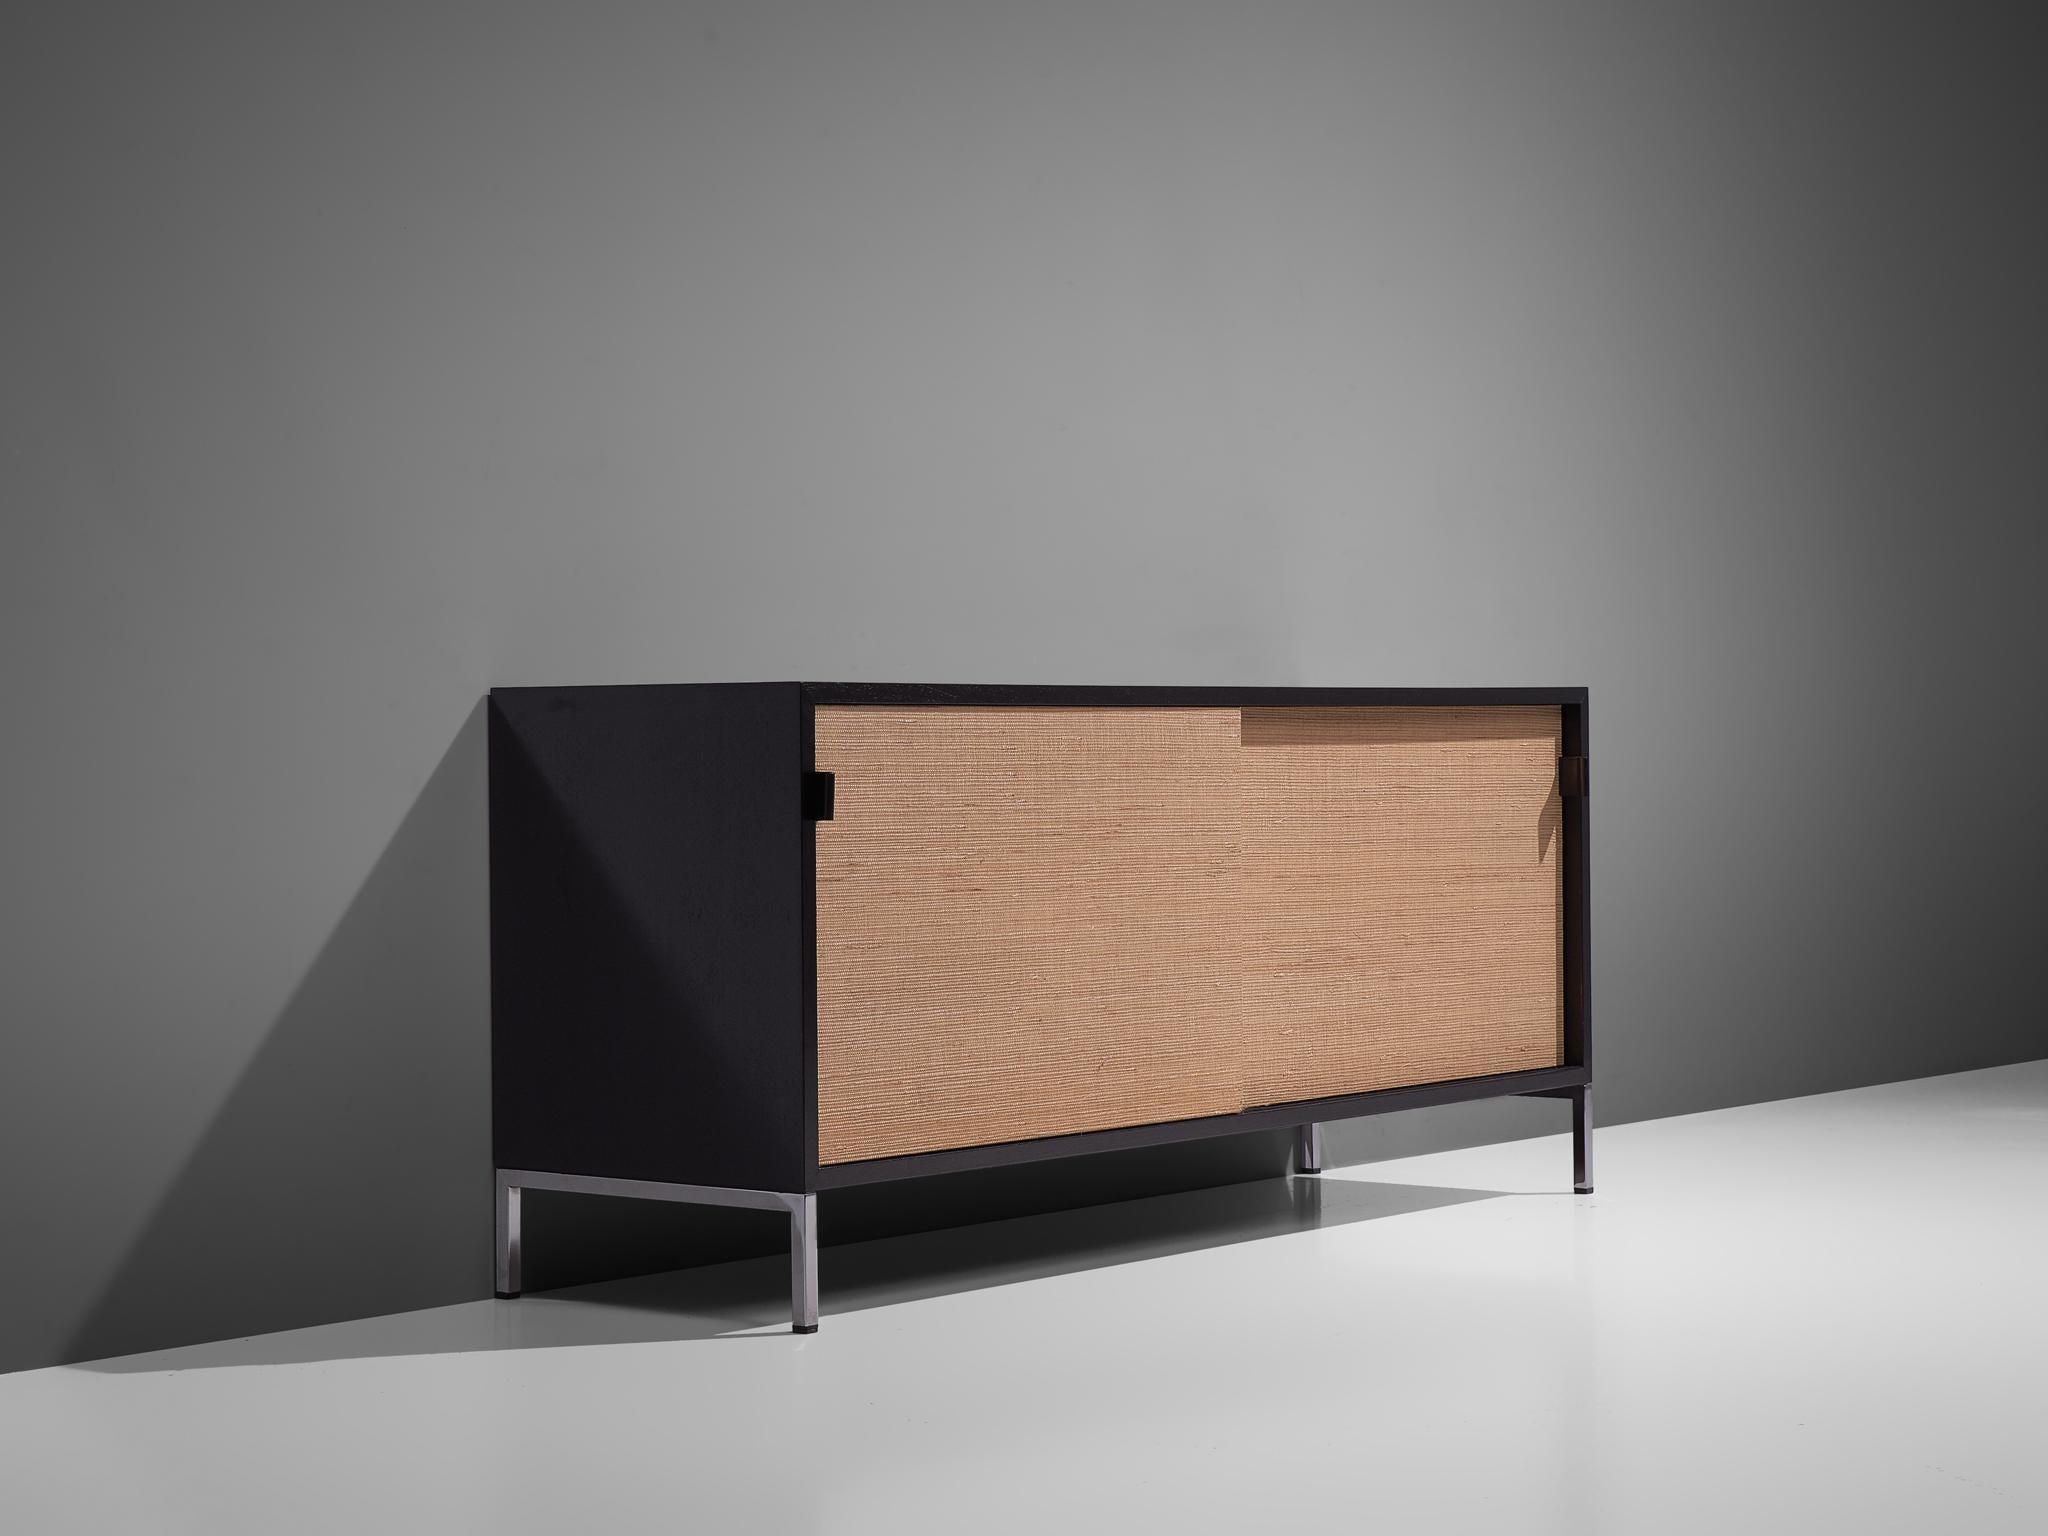 Florence Knoll for Knoll, sideboard, cane, ebonized wood, and metal, United States, design 1961, production later.

This sideboard is designed by Florence Knoll for Knoll International and was meant for the headquarters of Knoll in Italy. The